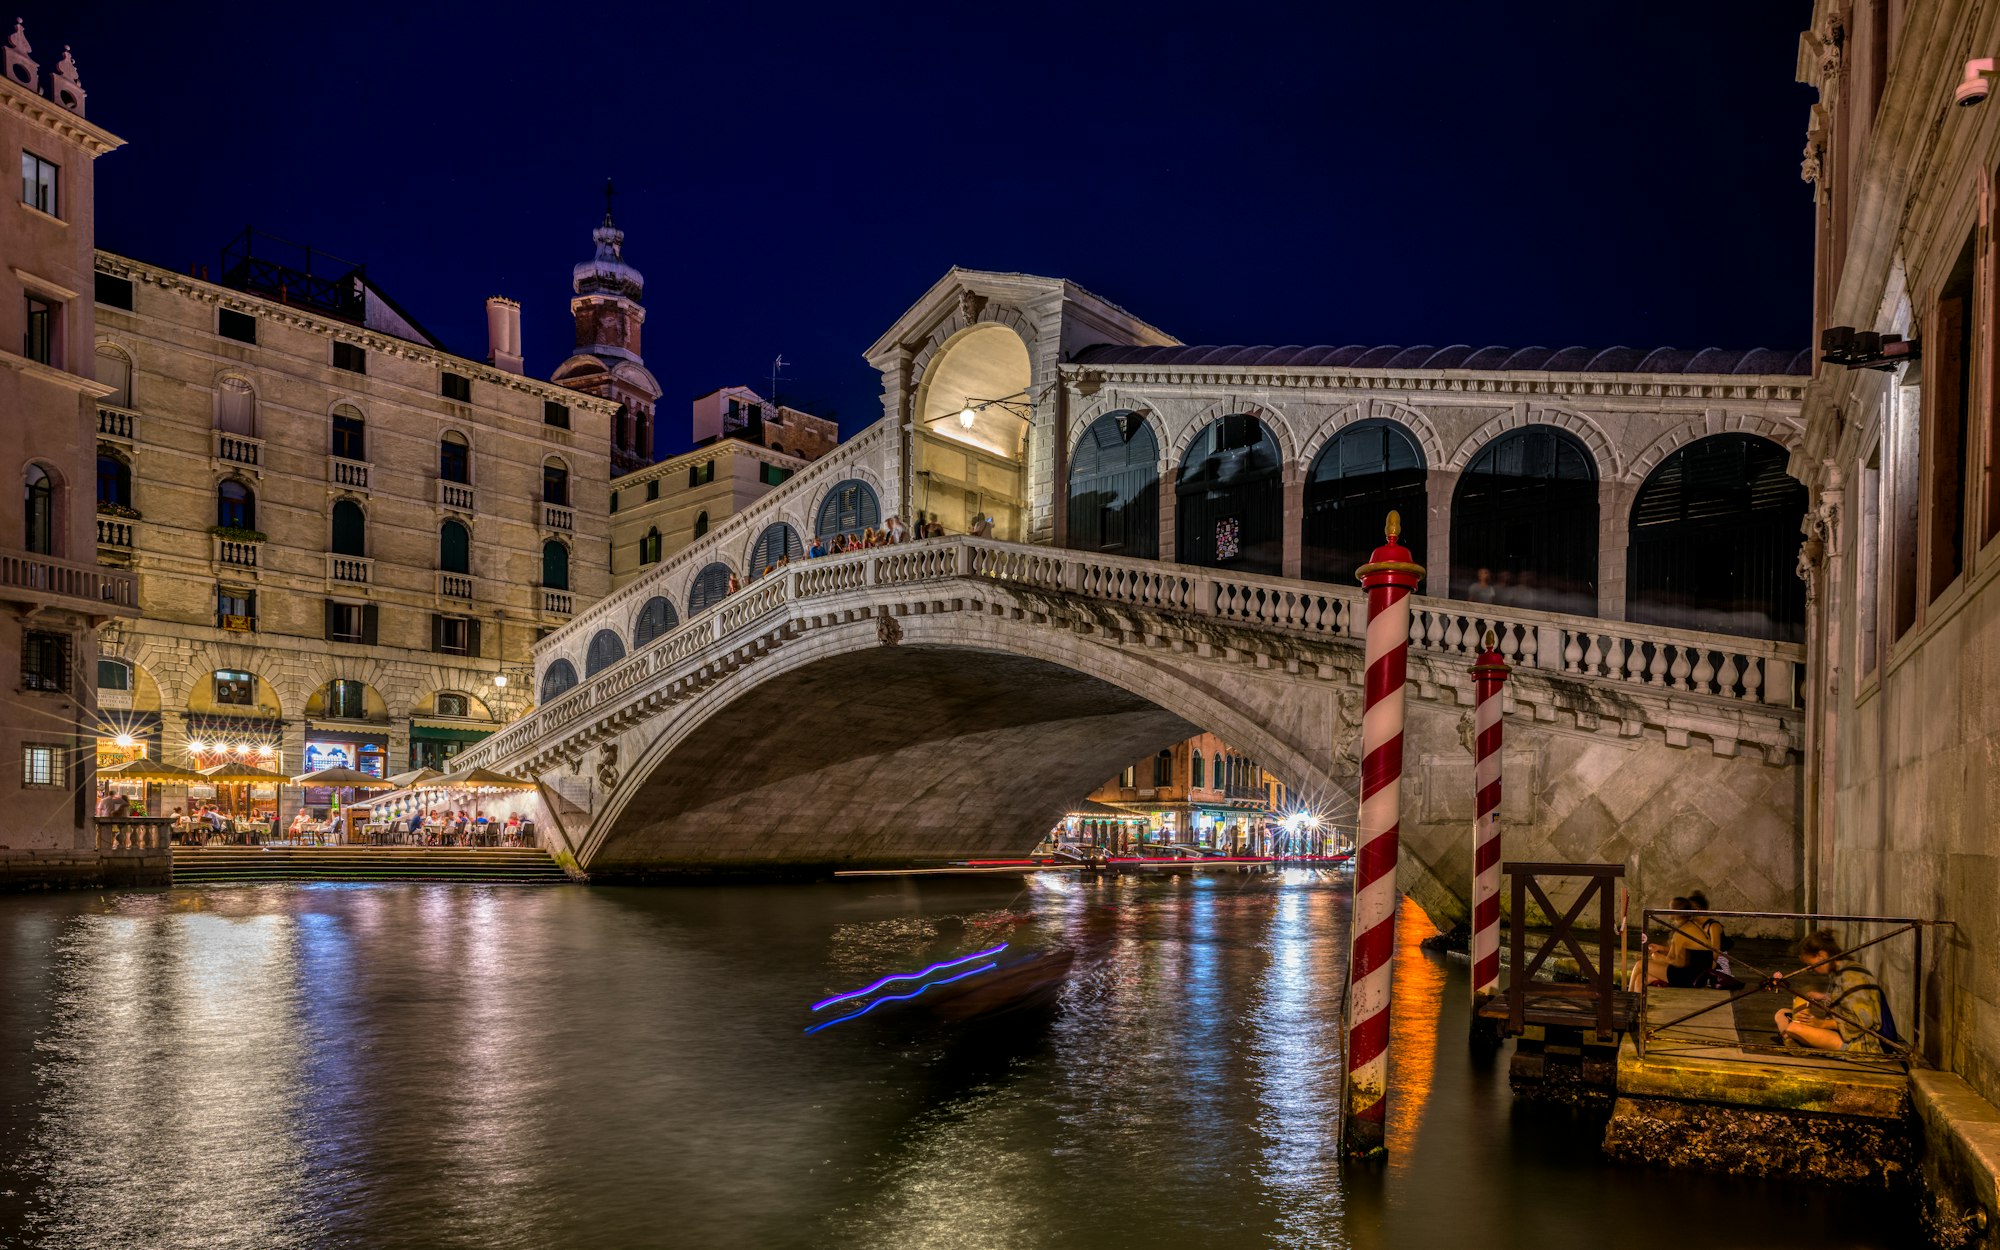 What to do near Rialto Bridge in Venice: 10 things to do and visit